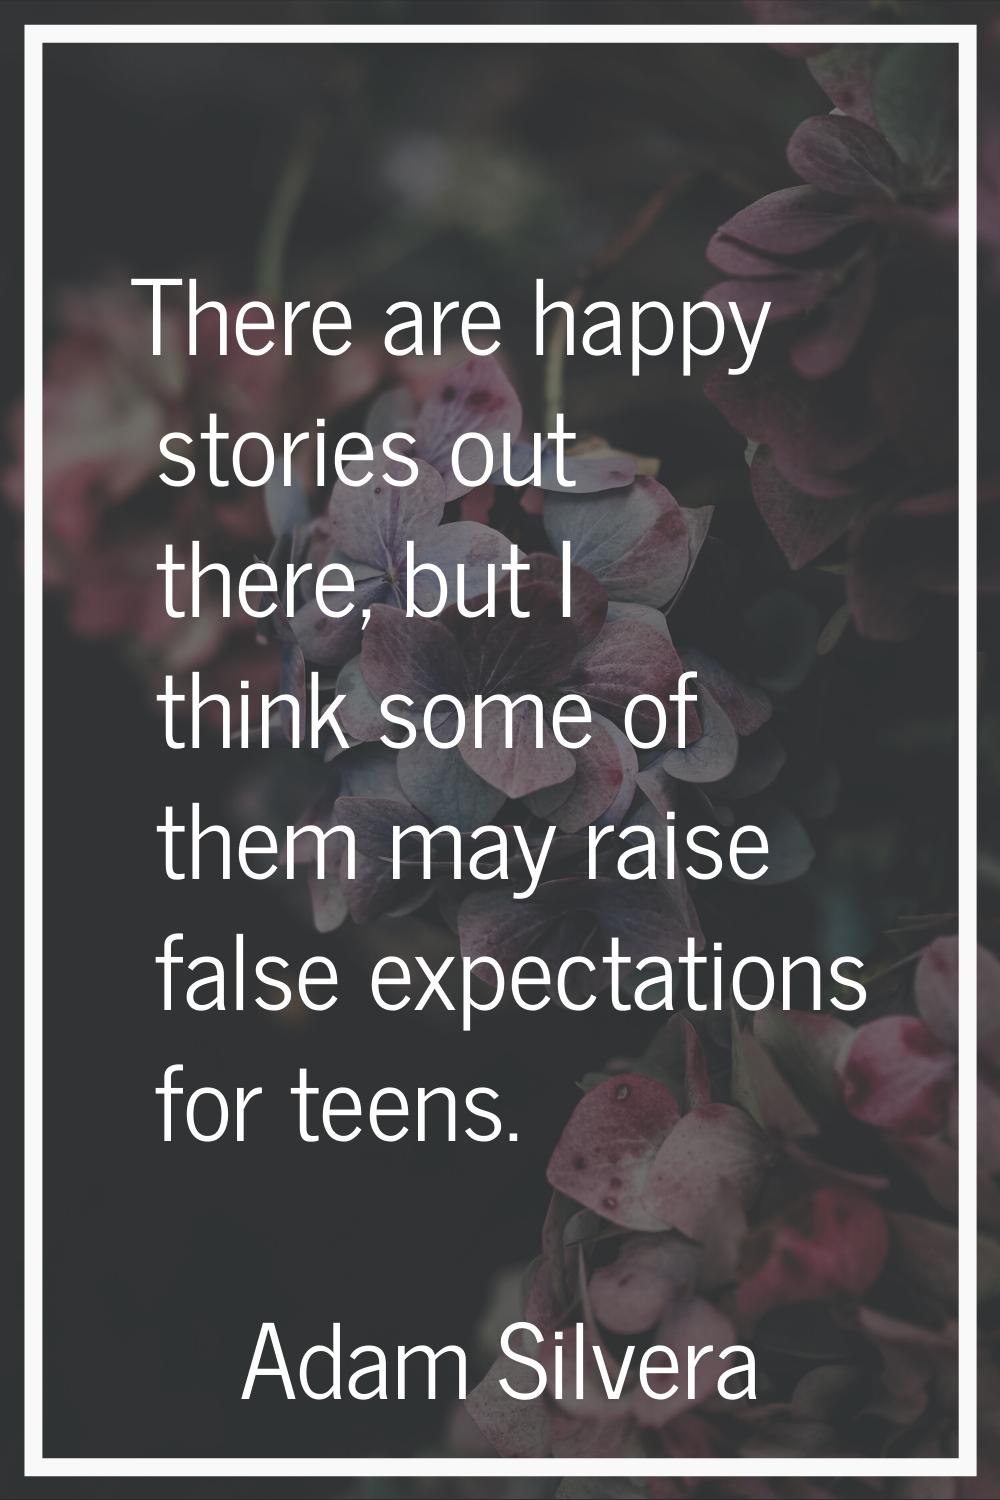 There are happy stories out there, but I think some of them may raise false expectations for teens.